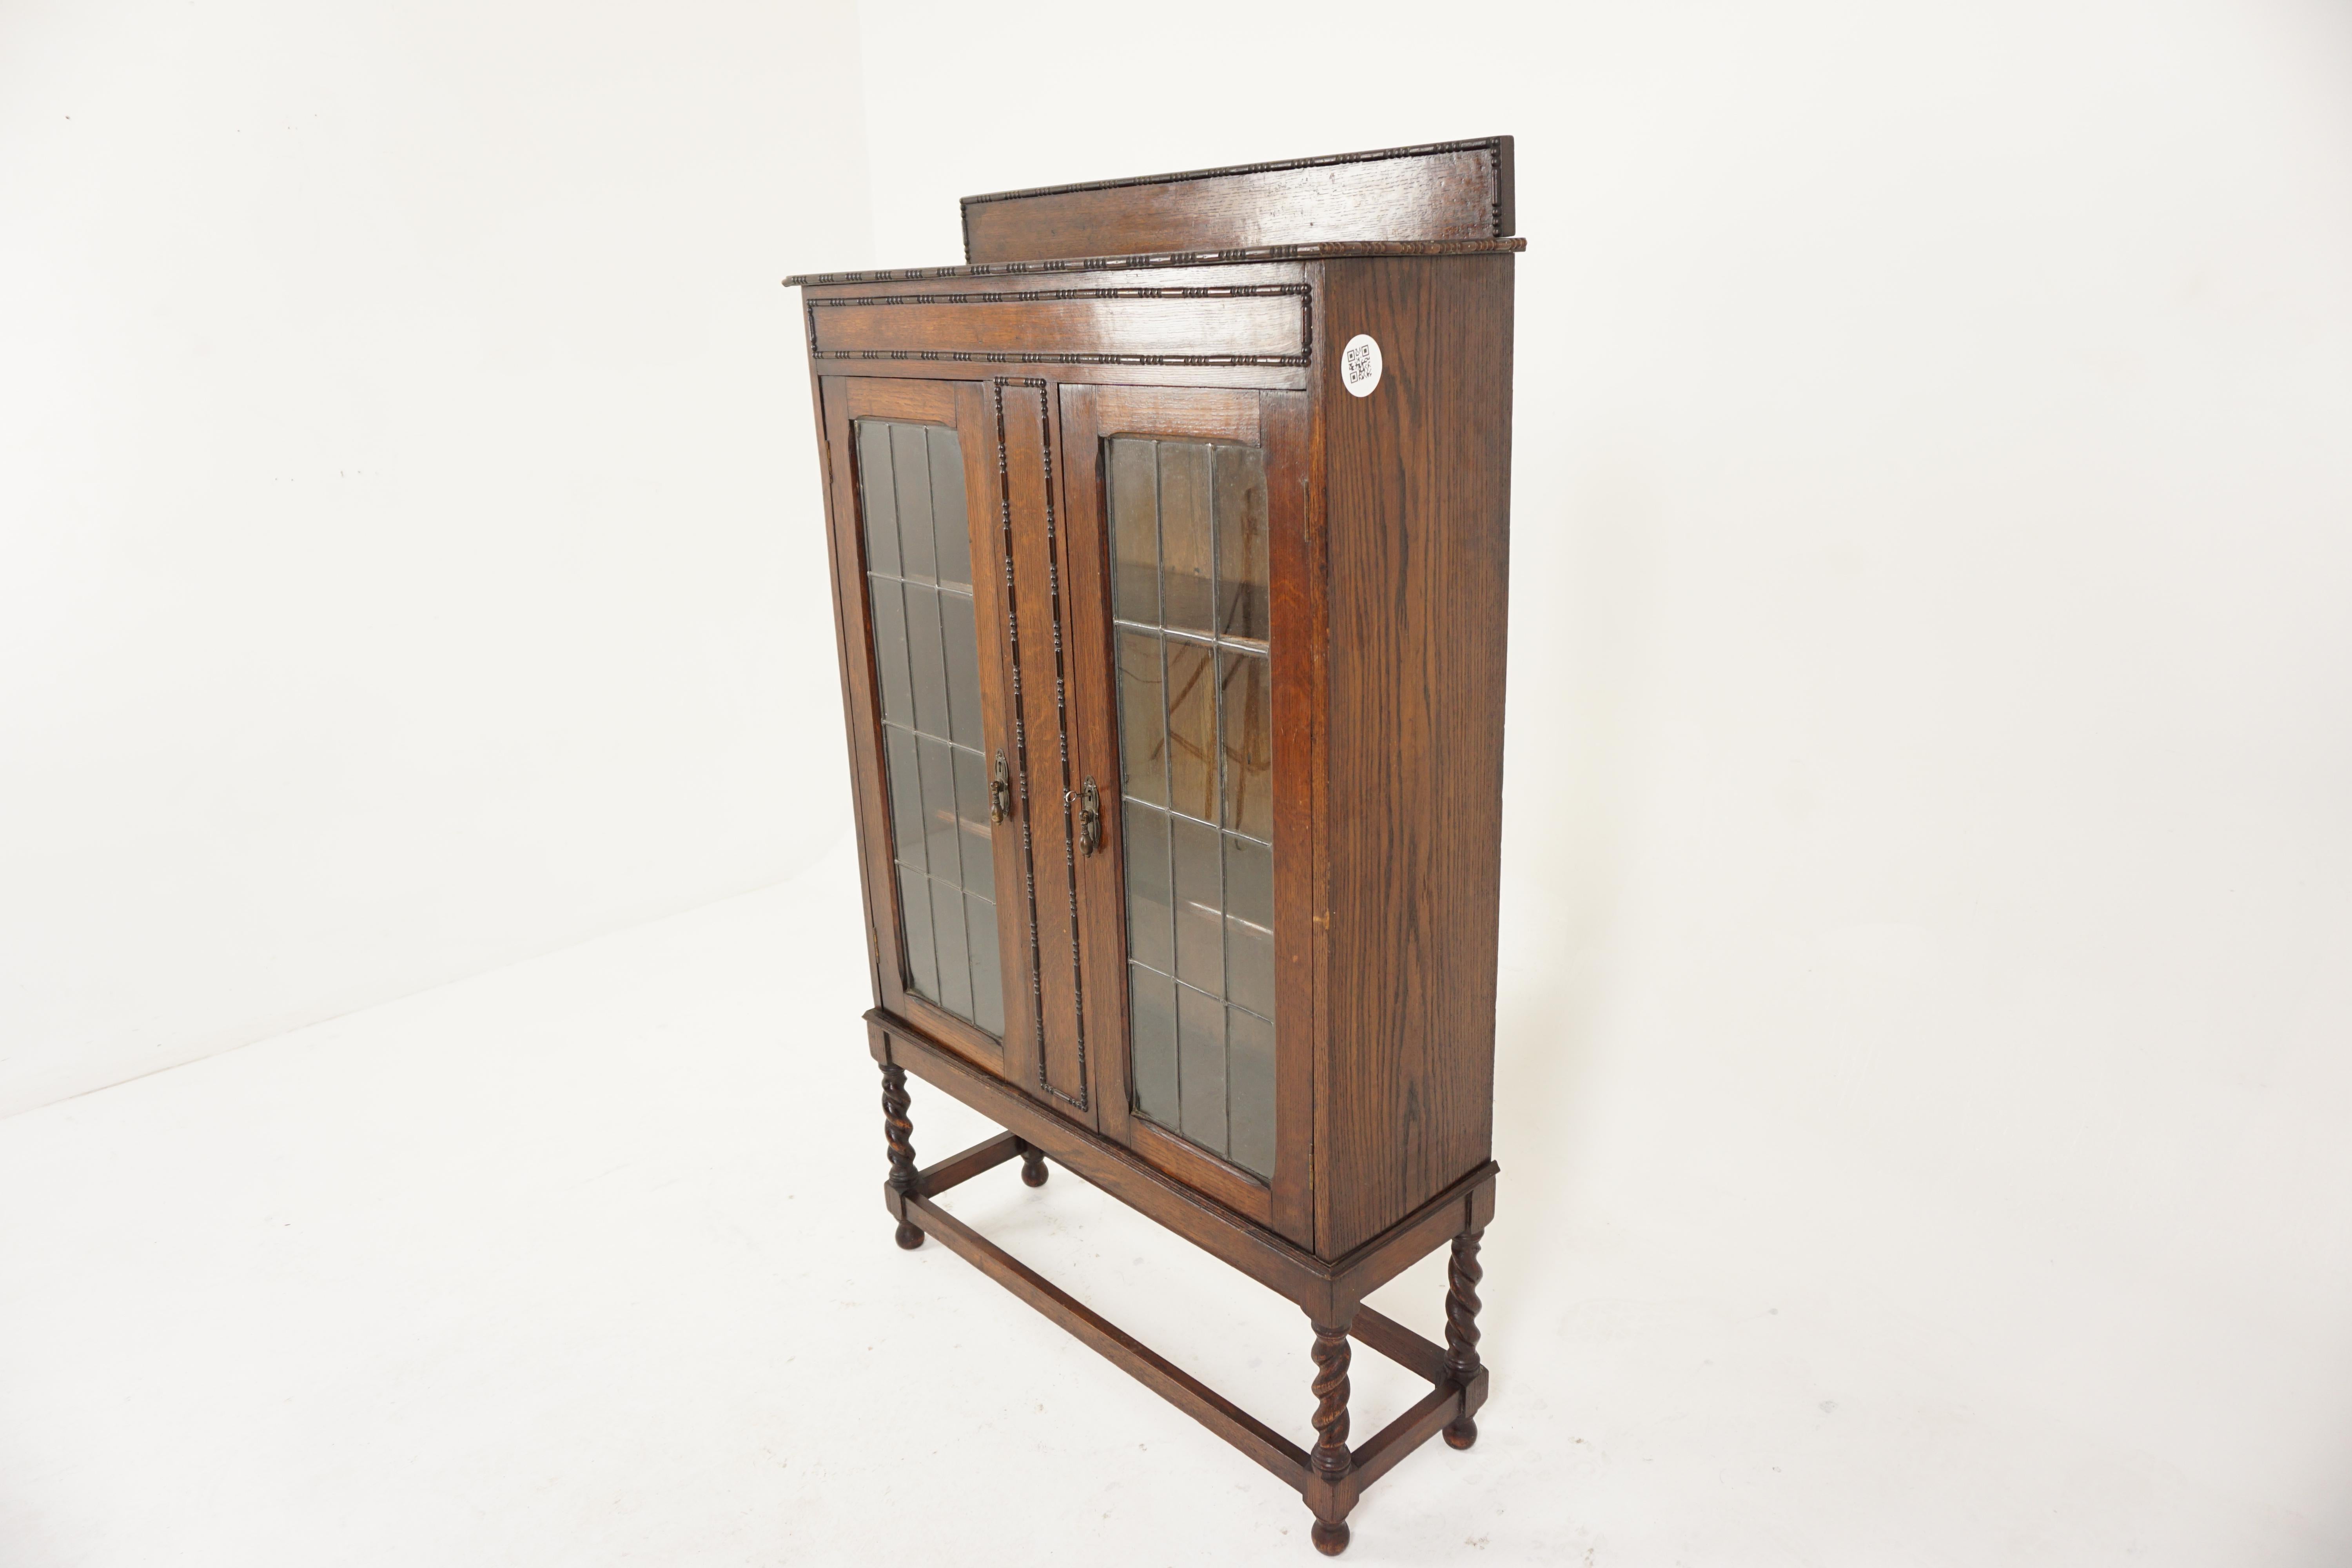 Antique Leaded Glass Barley Twist Oak bookcase, display cabinet, Scotland 1910, H811

Scotland 1910
Solid Oak
Original finish
Pediment with beading on front
Rectangular moulded top with beading
Center panel flanked by a pair of leaded glass